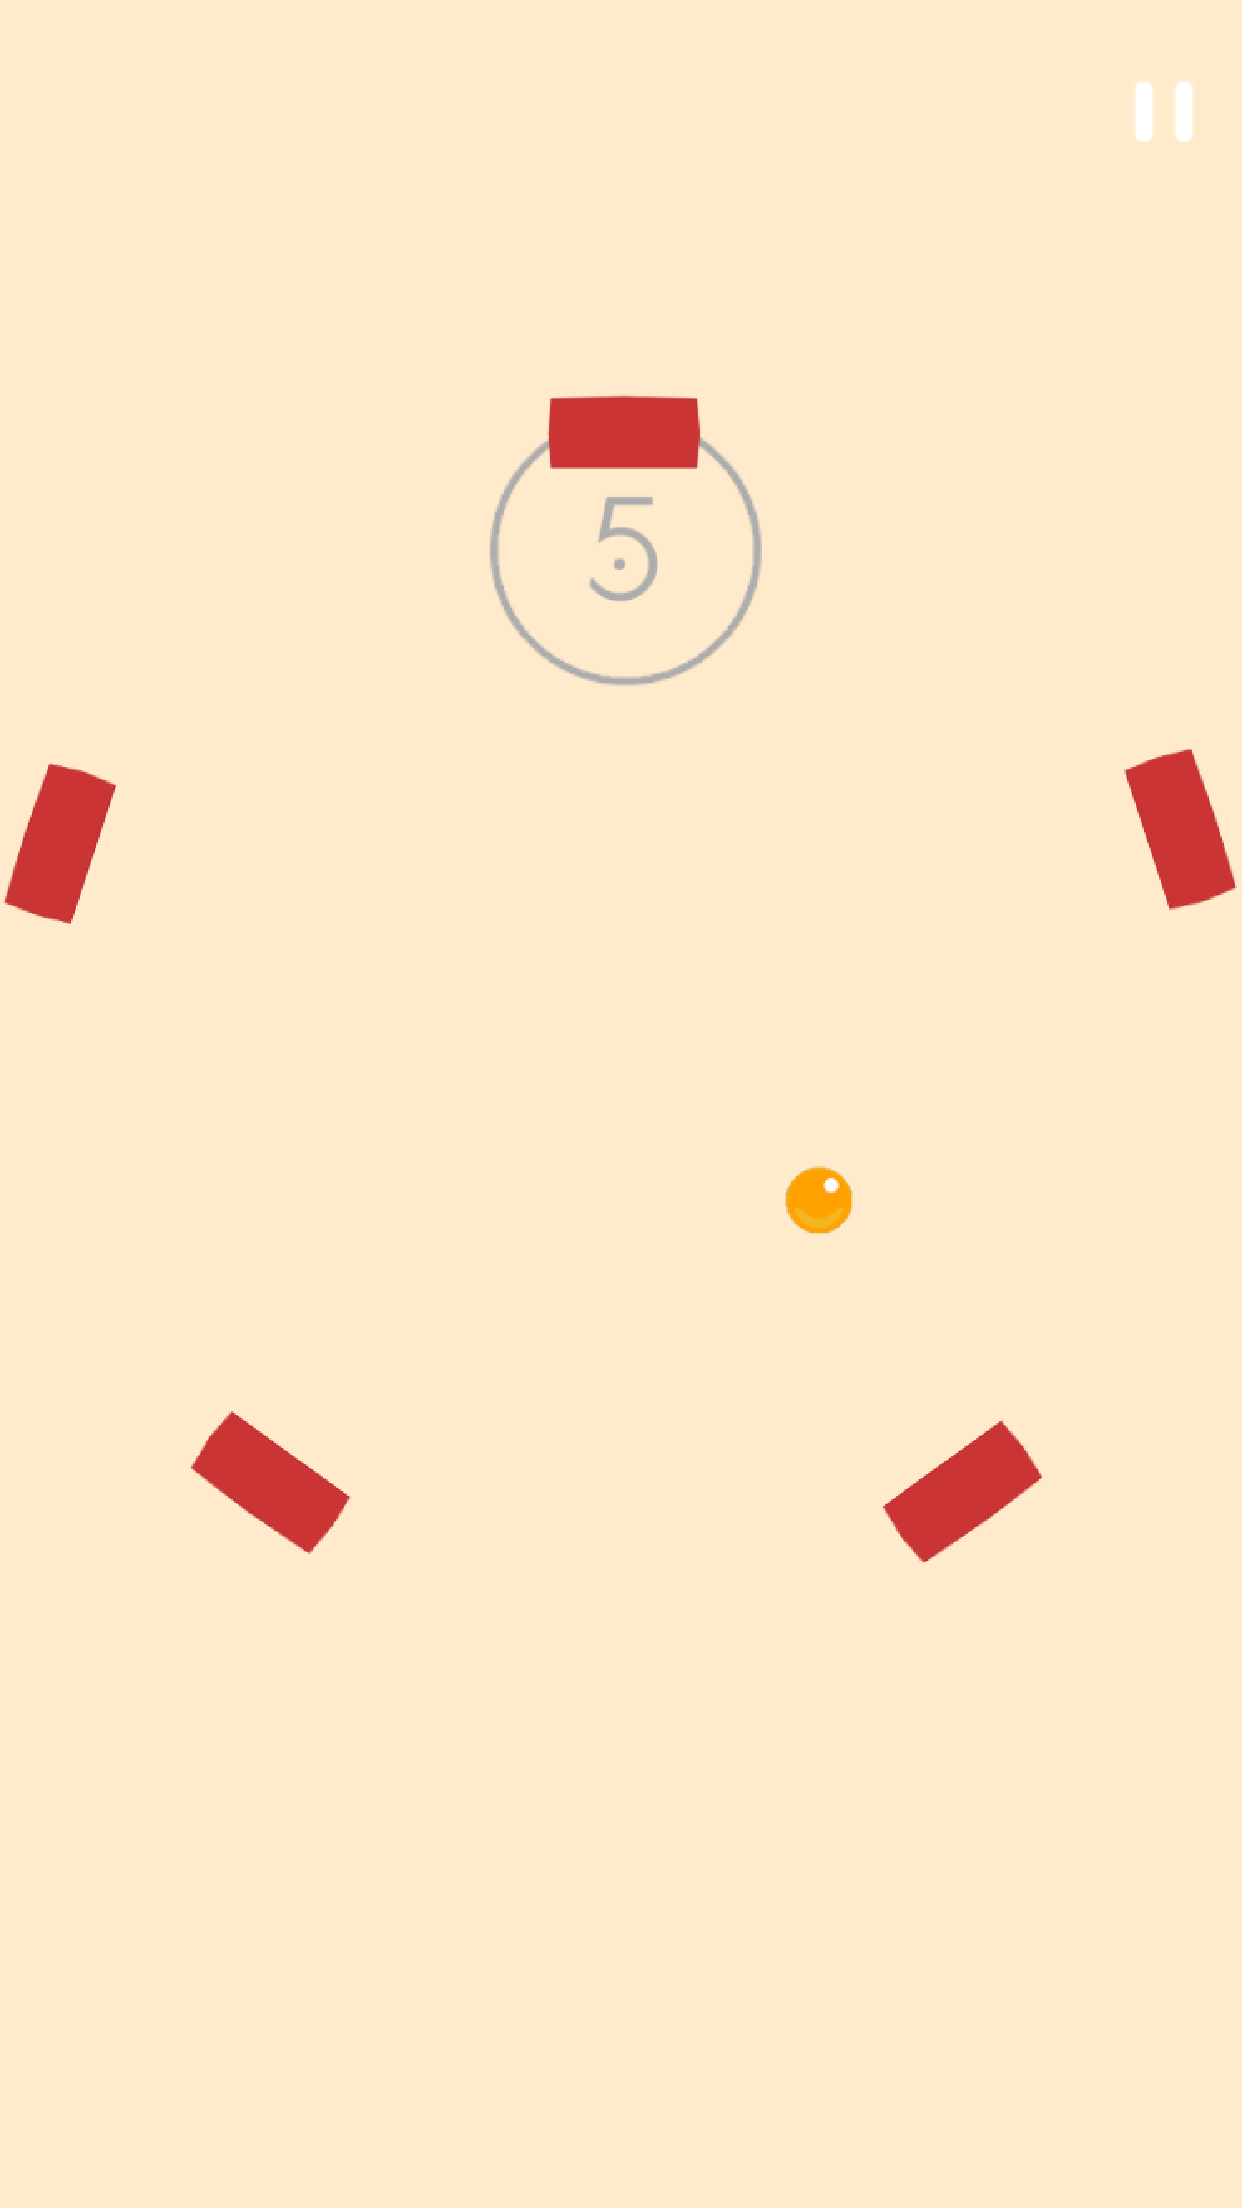 Screenshot 1 of ILUO-one ball to the end 